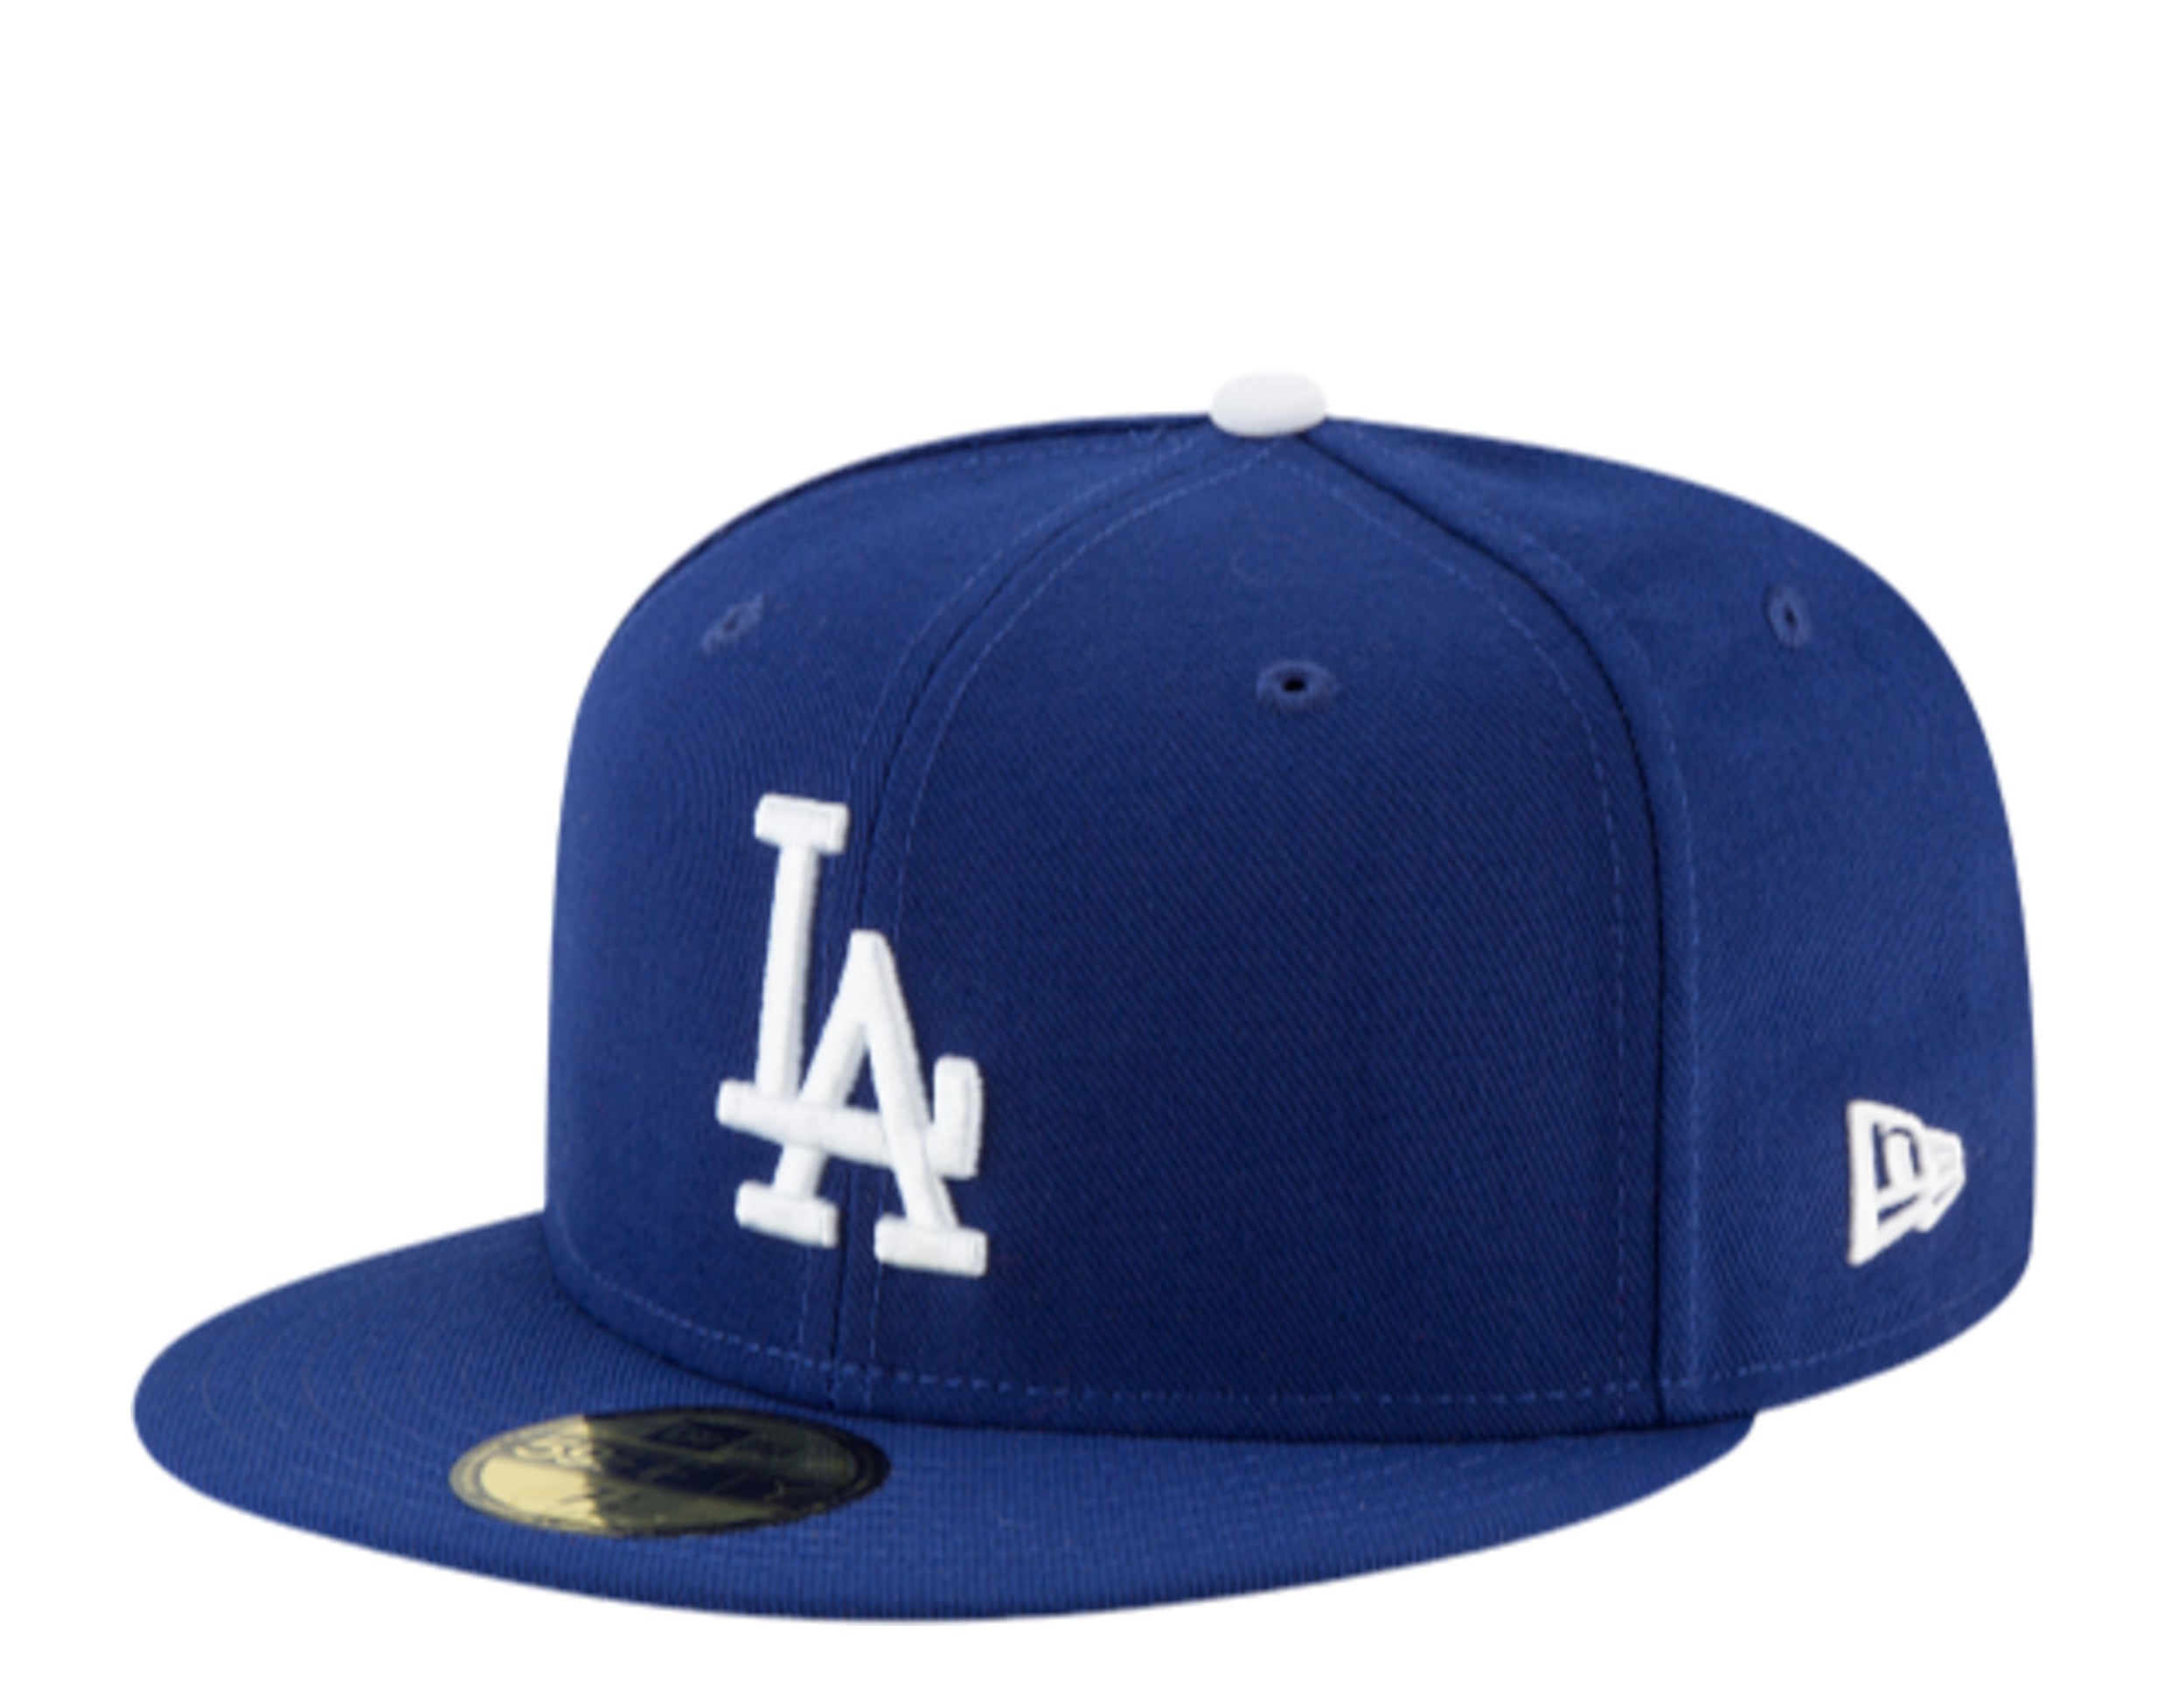 New Era Los Angeles Dodgers 60th Season Patch Fitted Hat Fitted Hat Blue/ Orange - US